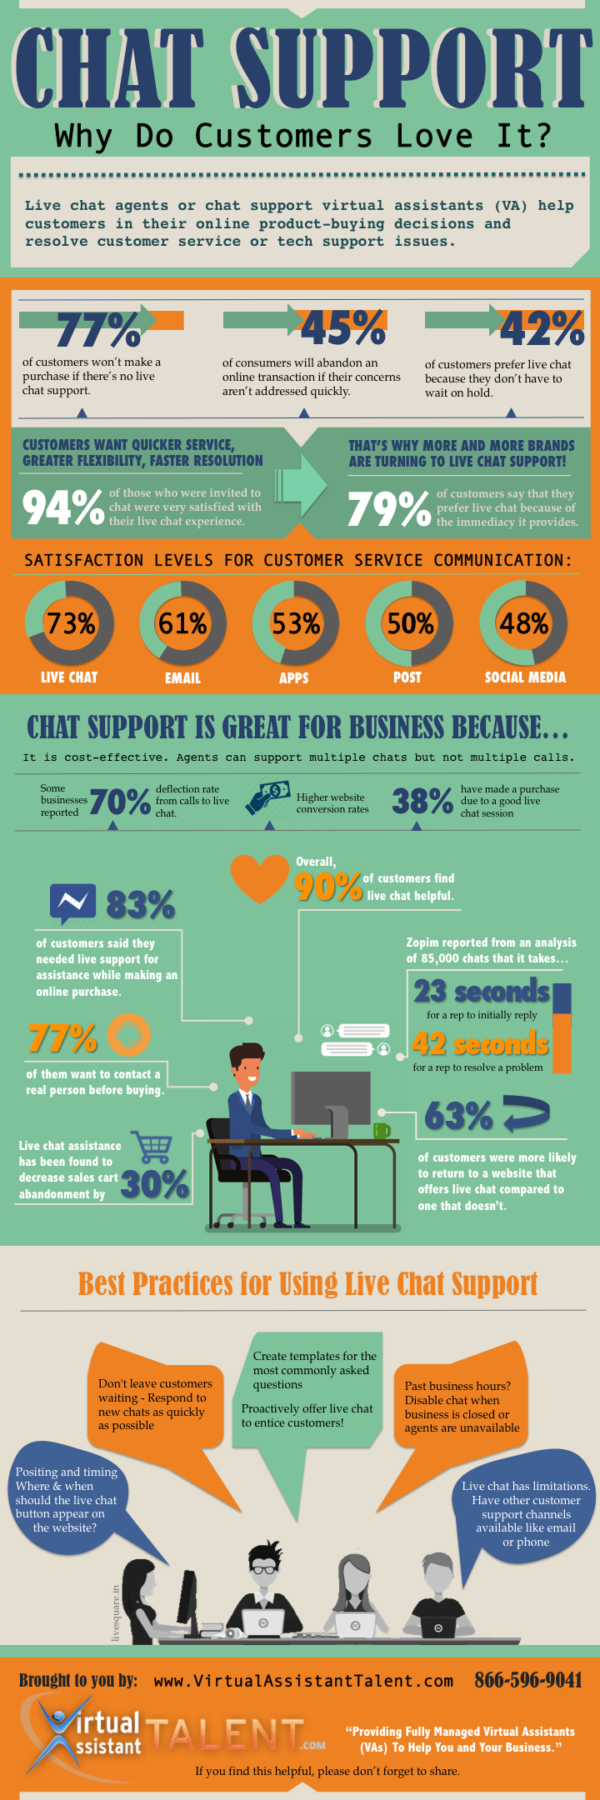 Business-to-business customers expect personal service in online chat